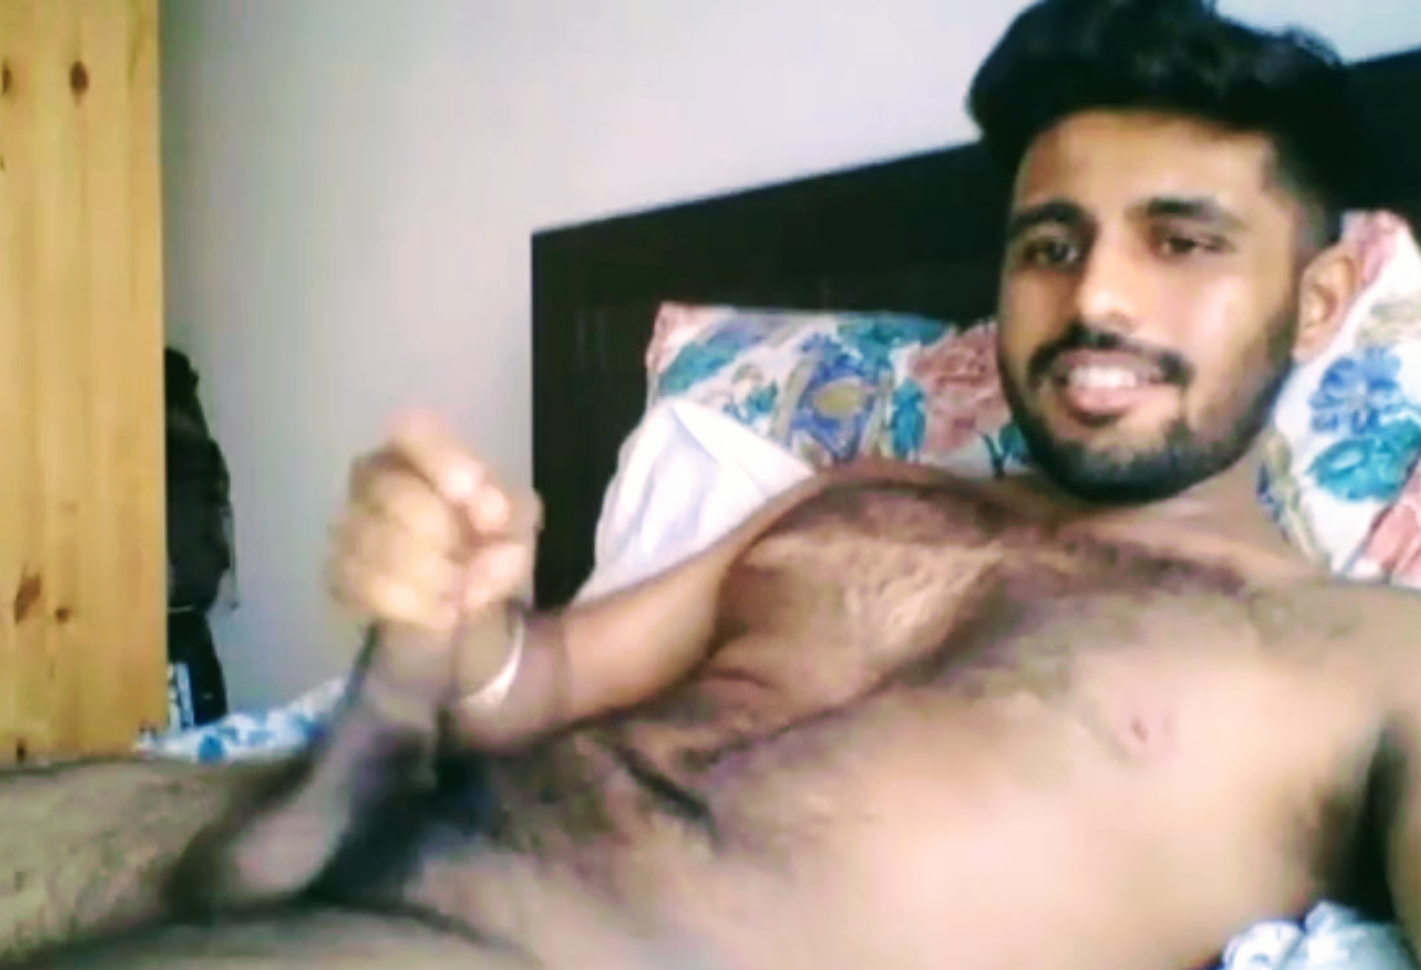 Desi gay video of a cute and sexy hottie jerking off - Indian Gay Site.